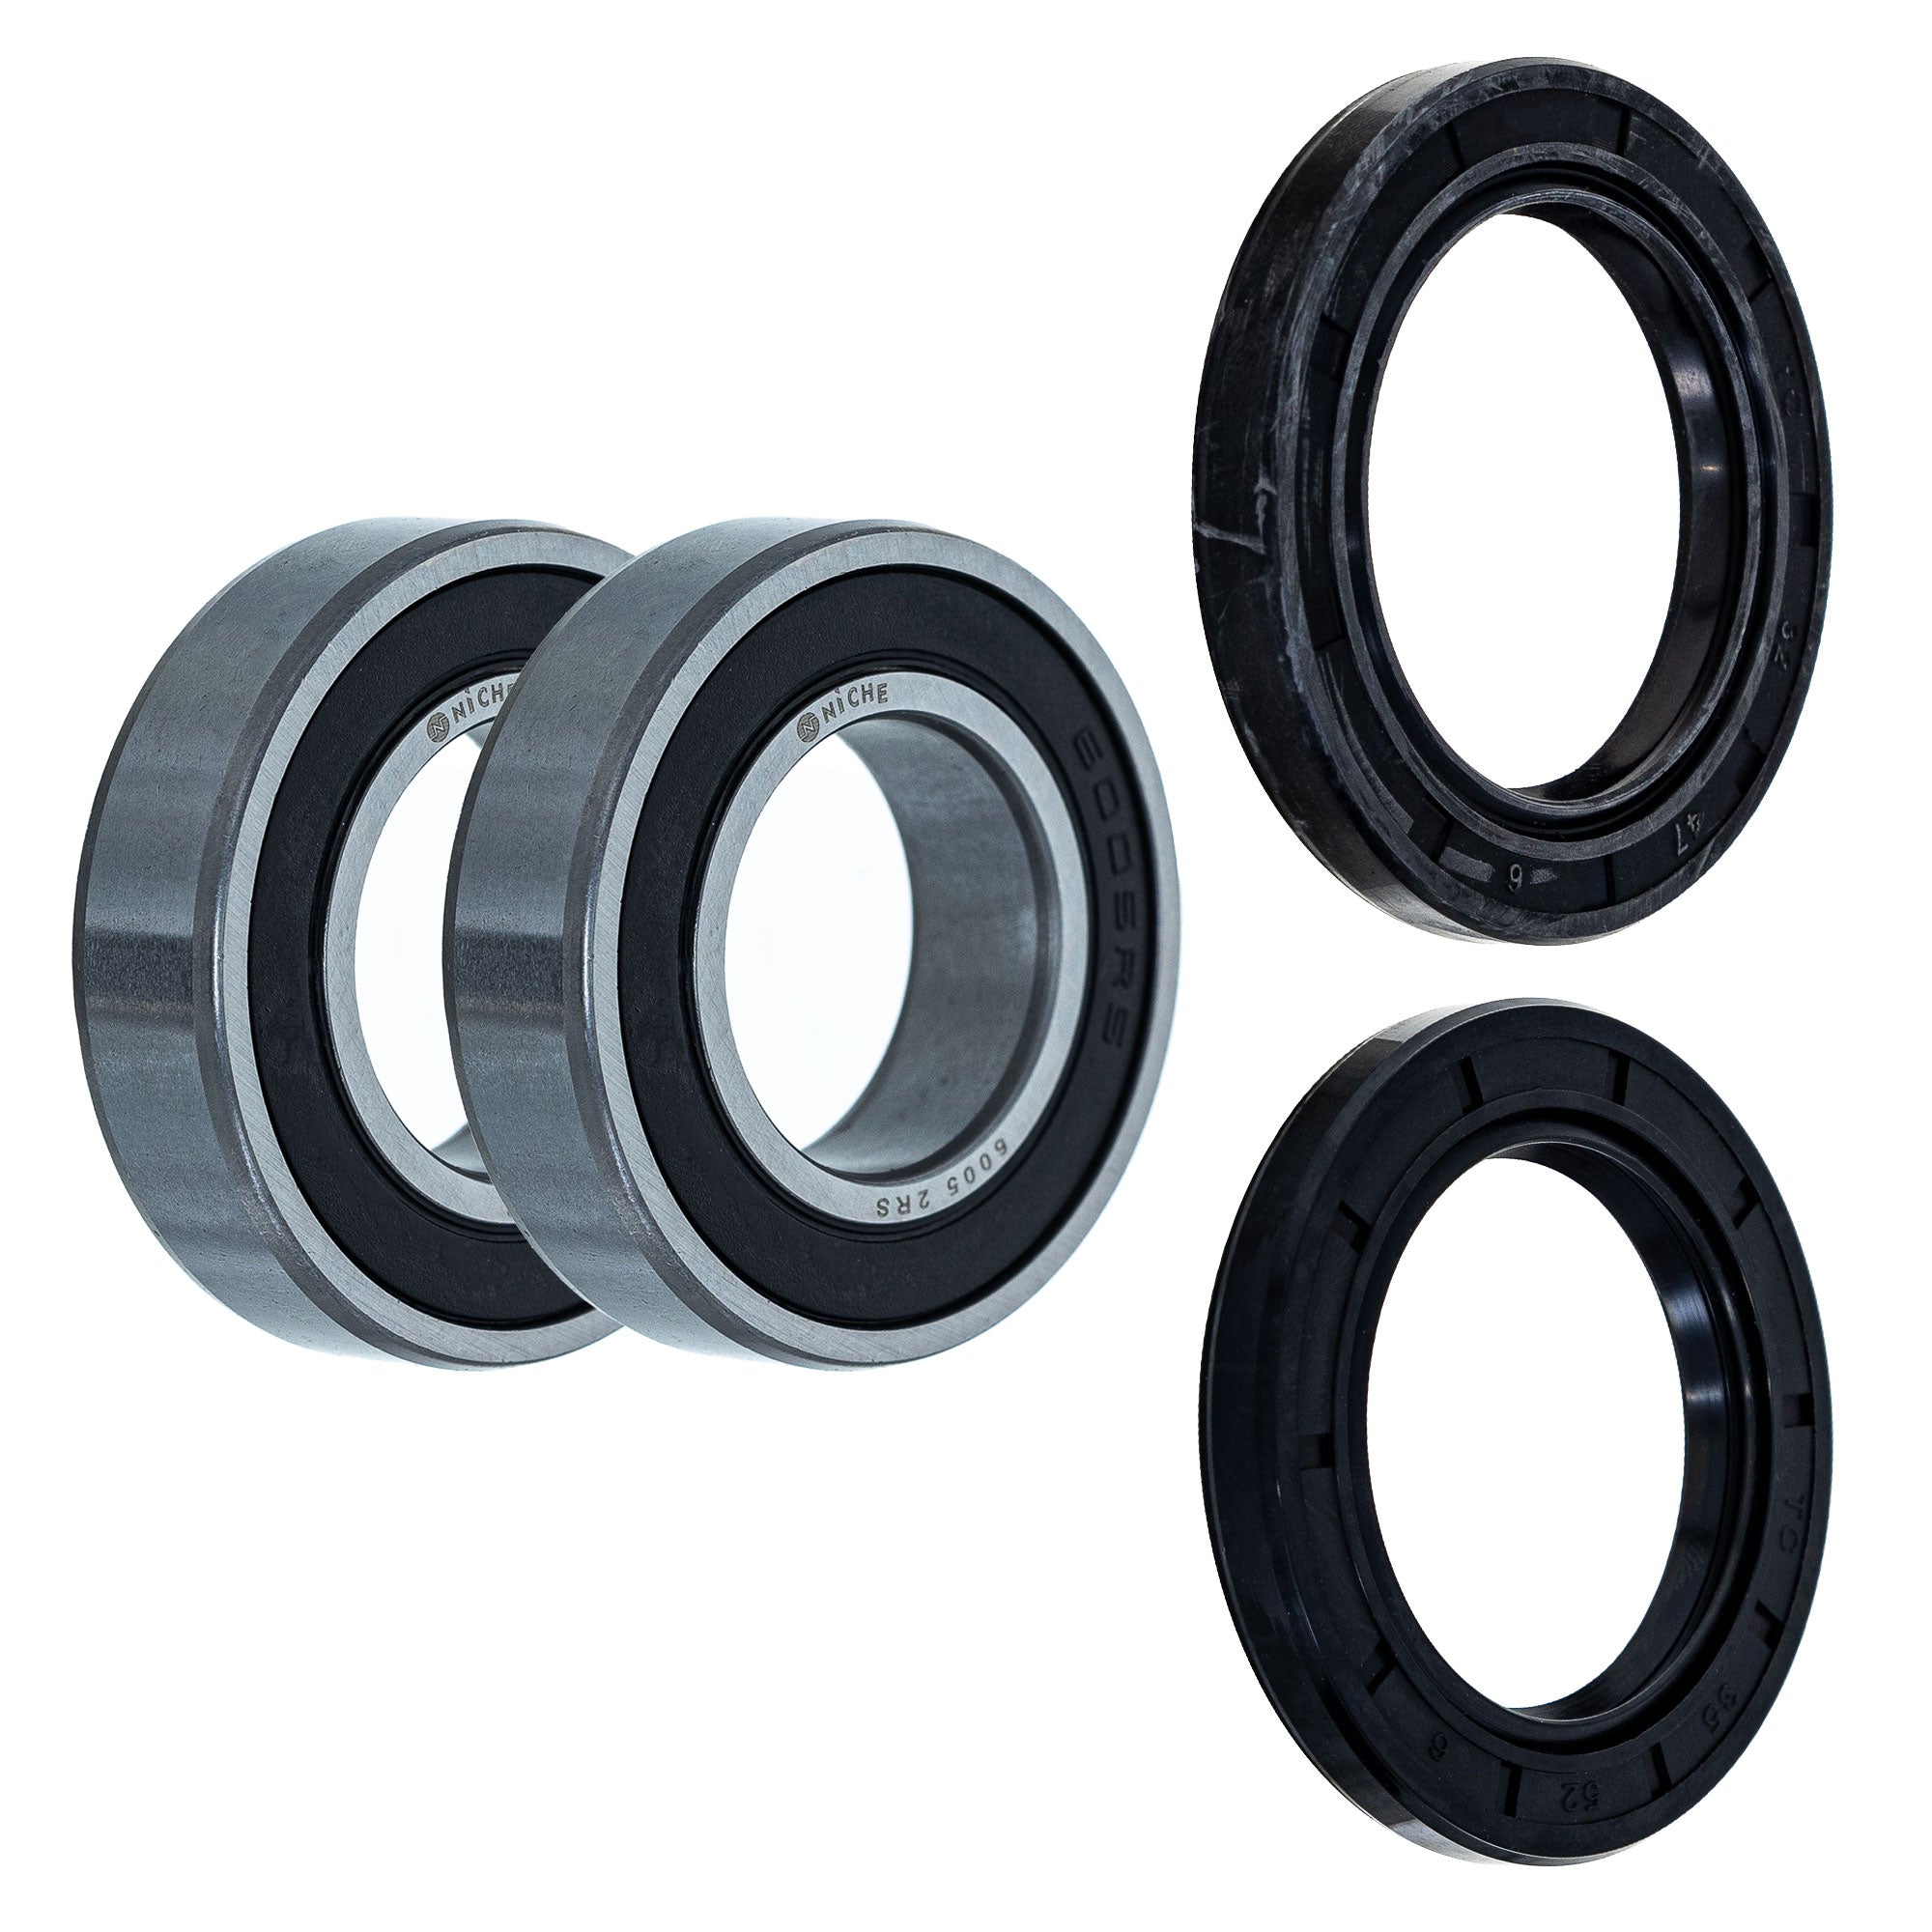 Wheel Bearing Seal Kit for zOTHER ZZR1200 ZRX1200 NICHE MK1009005